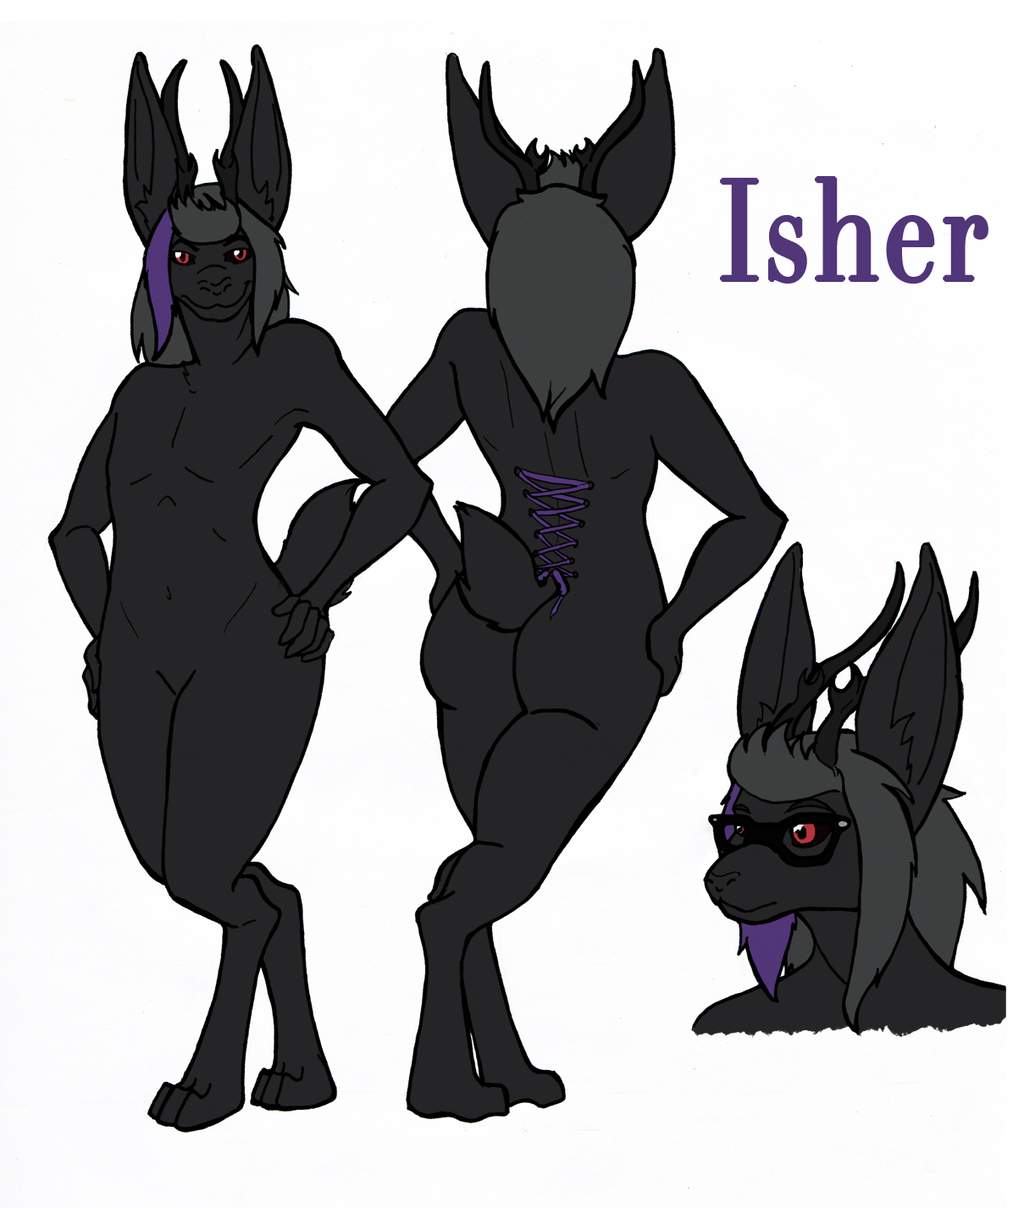 Most recent image: Isher Reference Sheet